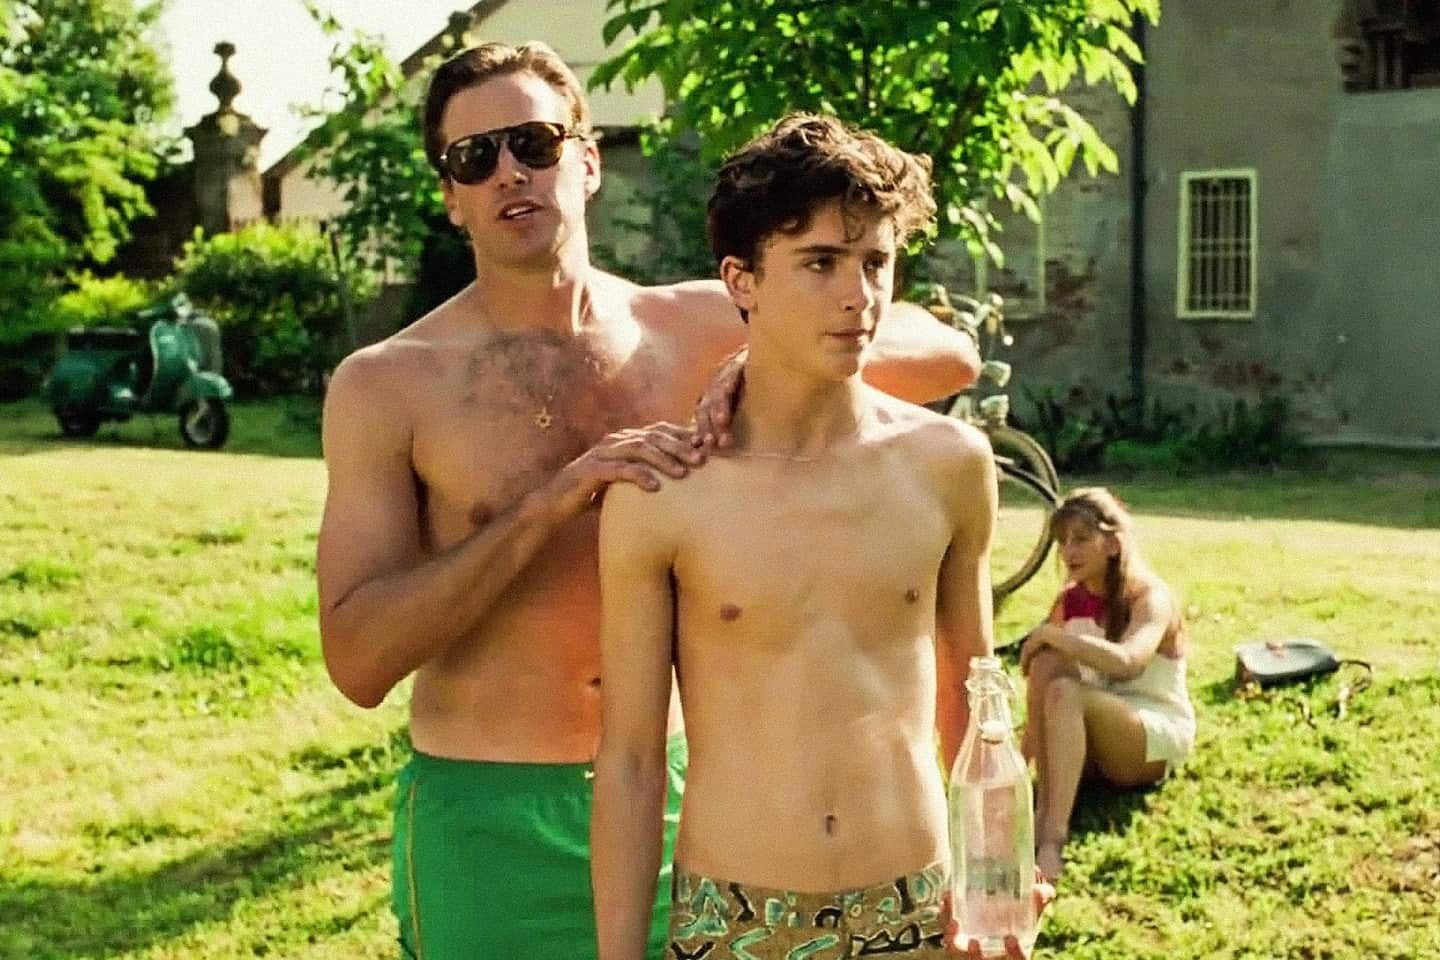 Review & Sinopsis Call Me by Your Name, Film Coming-of-Age 7